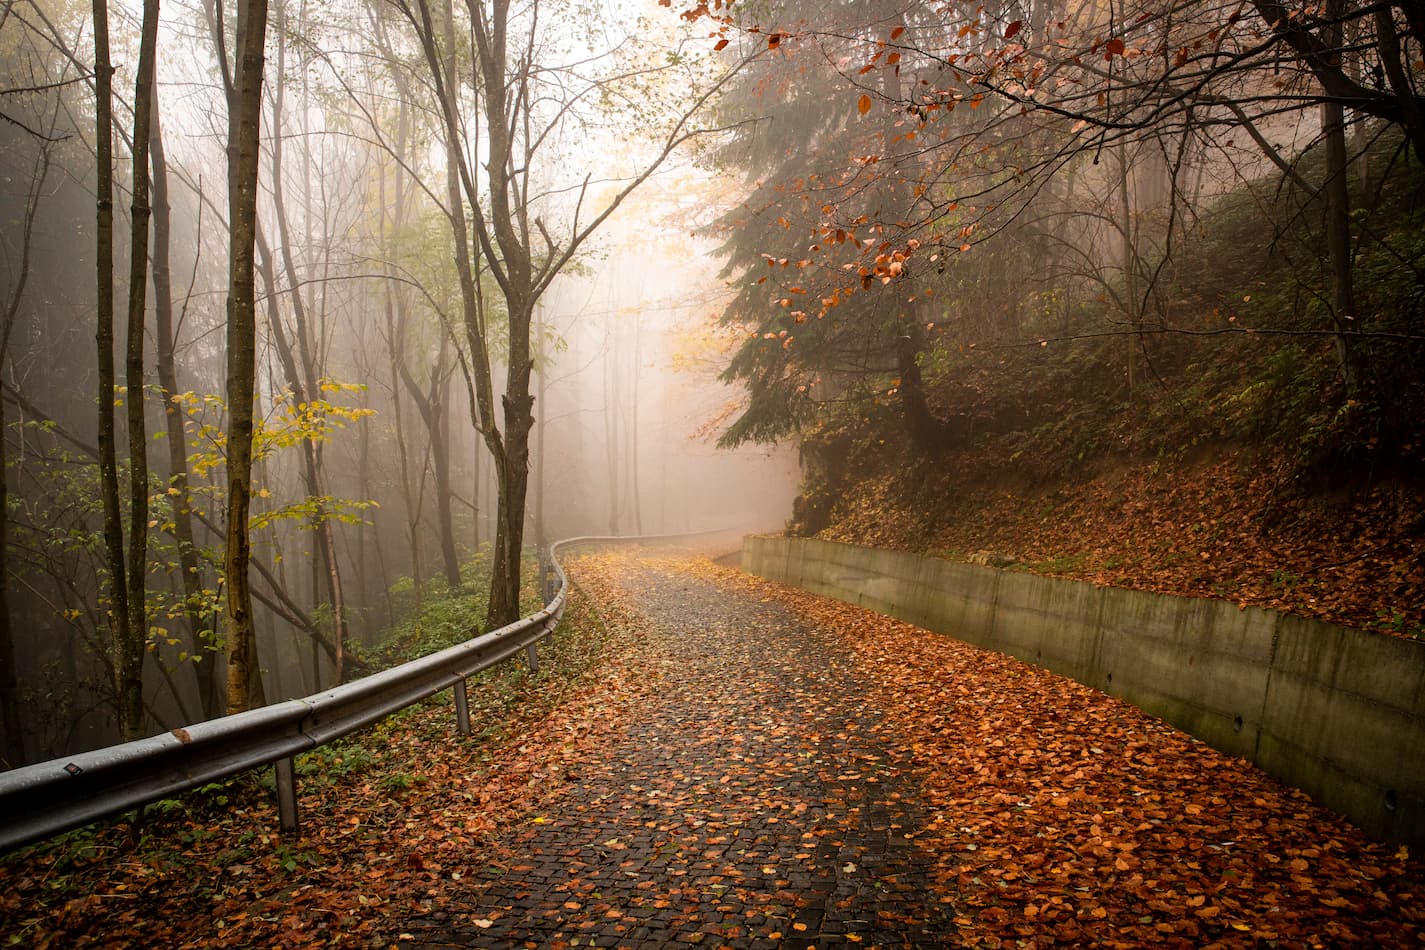 An image of a misty road in fall